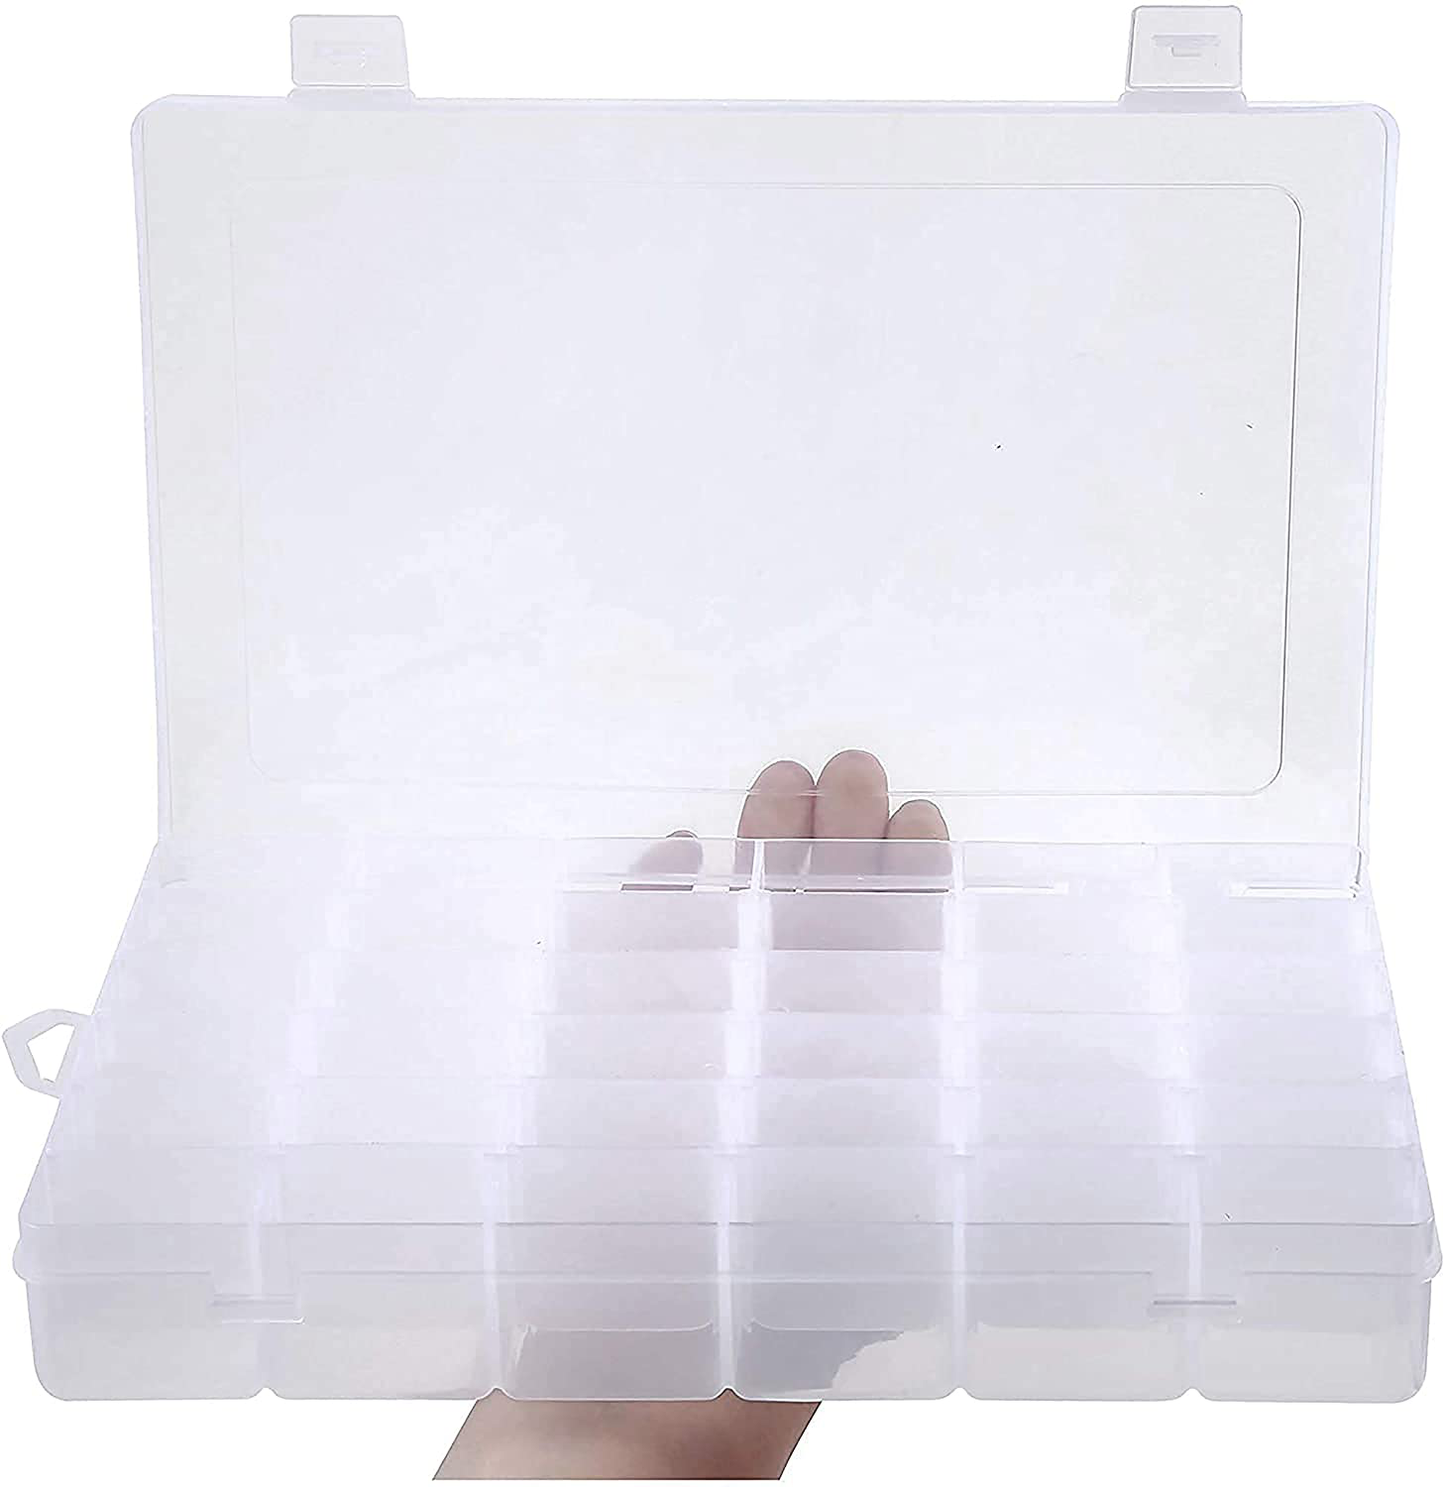 Organizer Box Adjustable Dividers - Plastic Compartment Storage Container for Washi Tapes, Craft, Beads, Jewelry, Small Parts